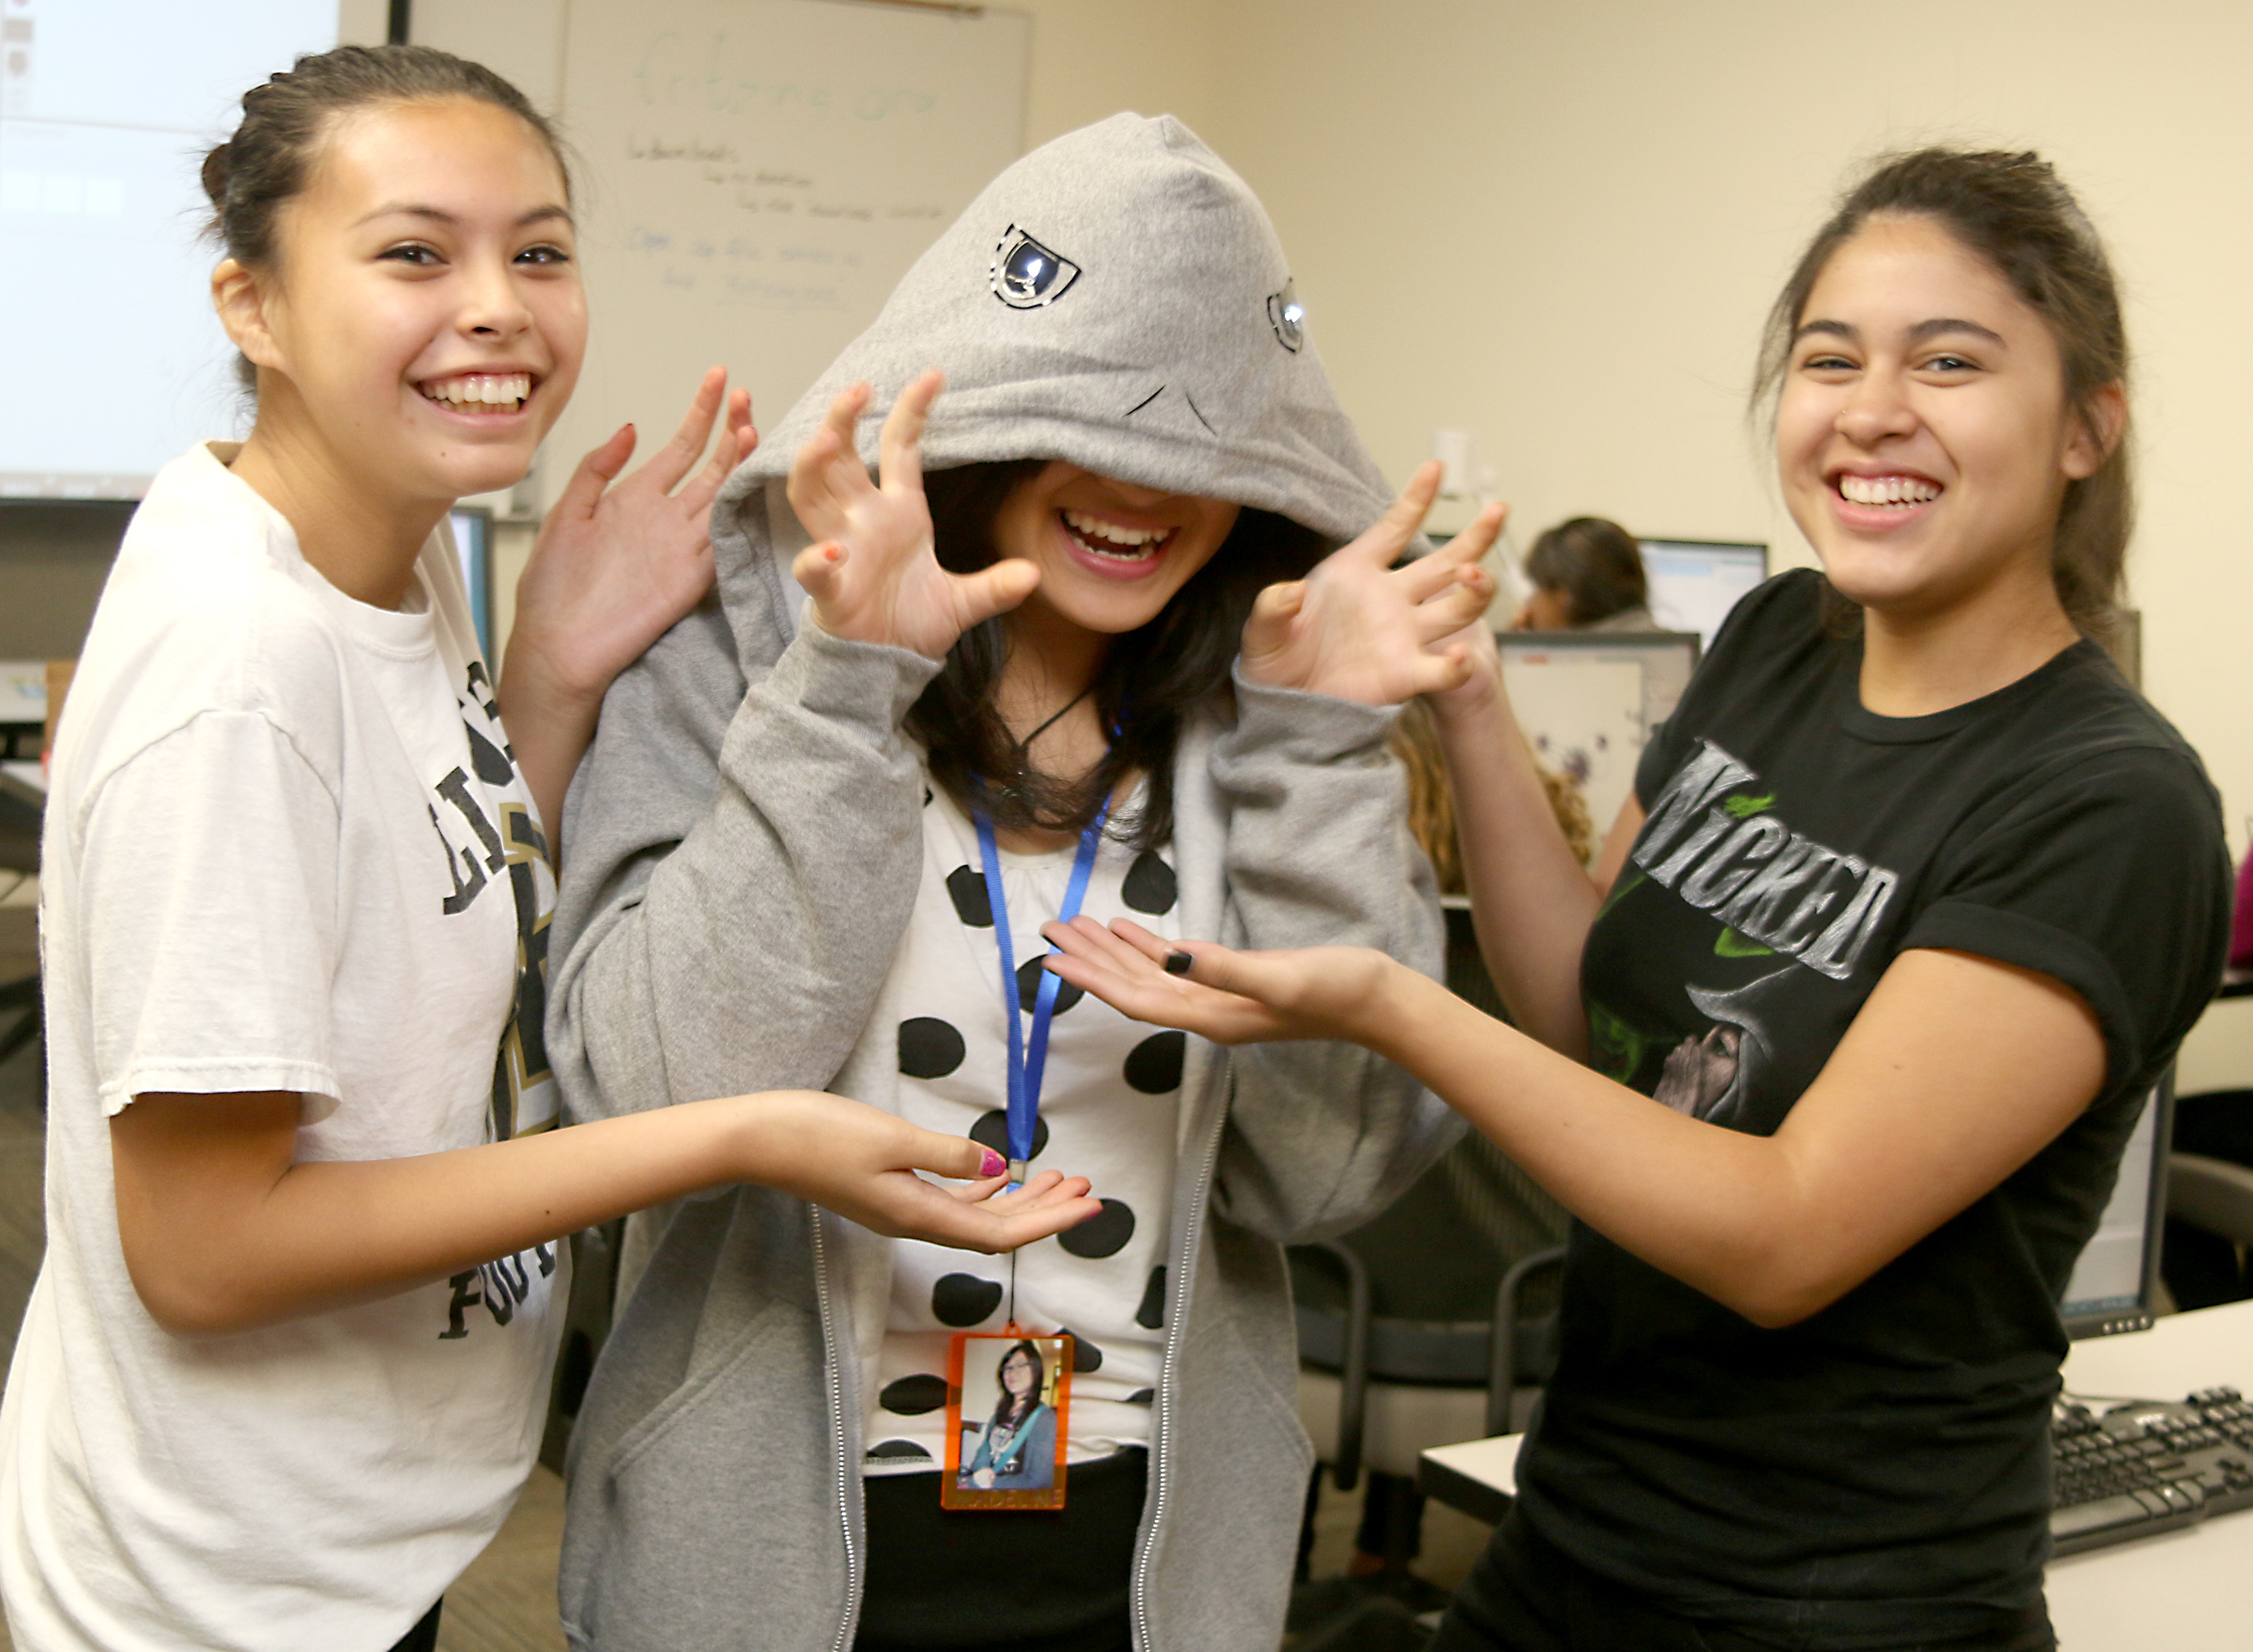 Miranda O. Salinas (left) of West Linn High School and Ariana Rivera of Hillsboro’s Century High School were part of the Wearable Tech Summer Camp at the Sylvania Campus’ MakerSpace in August. Fellow camper Madeline Pitoby is wearing the hoodie.